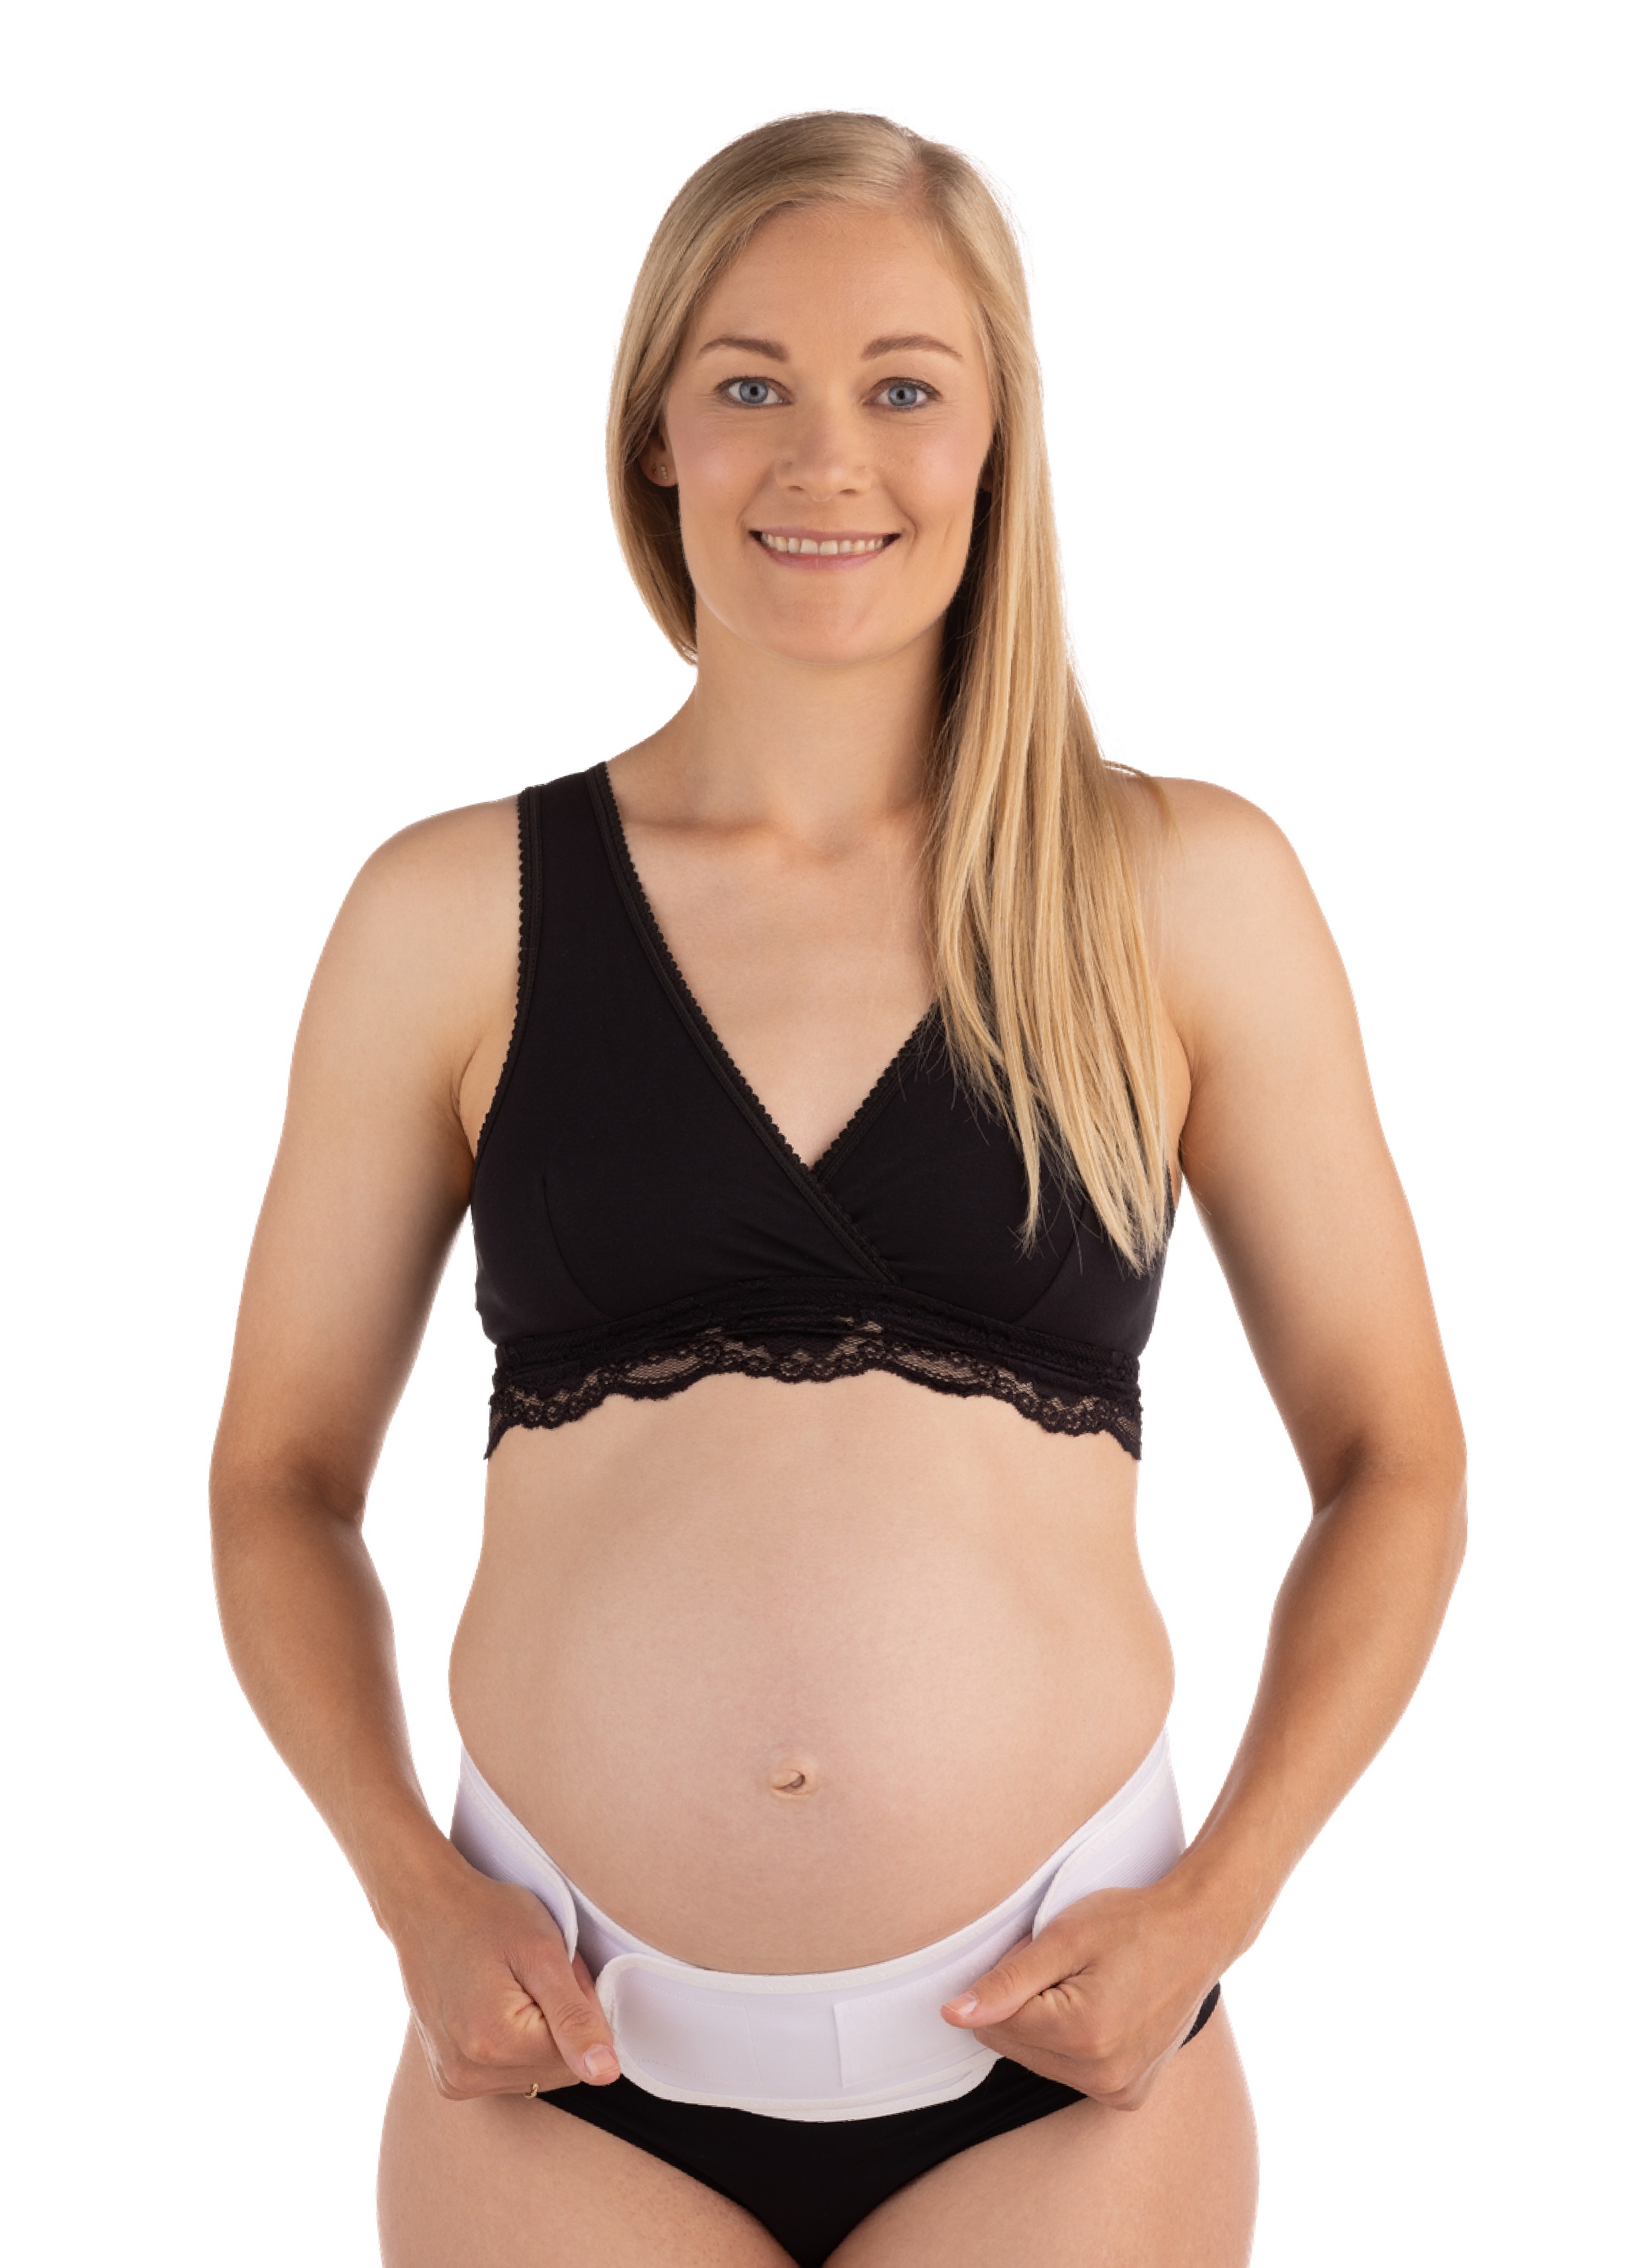 Carriwell Maternity Pads - Bellyssimo Maternity